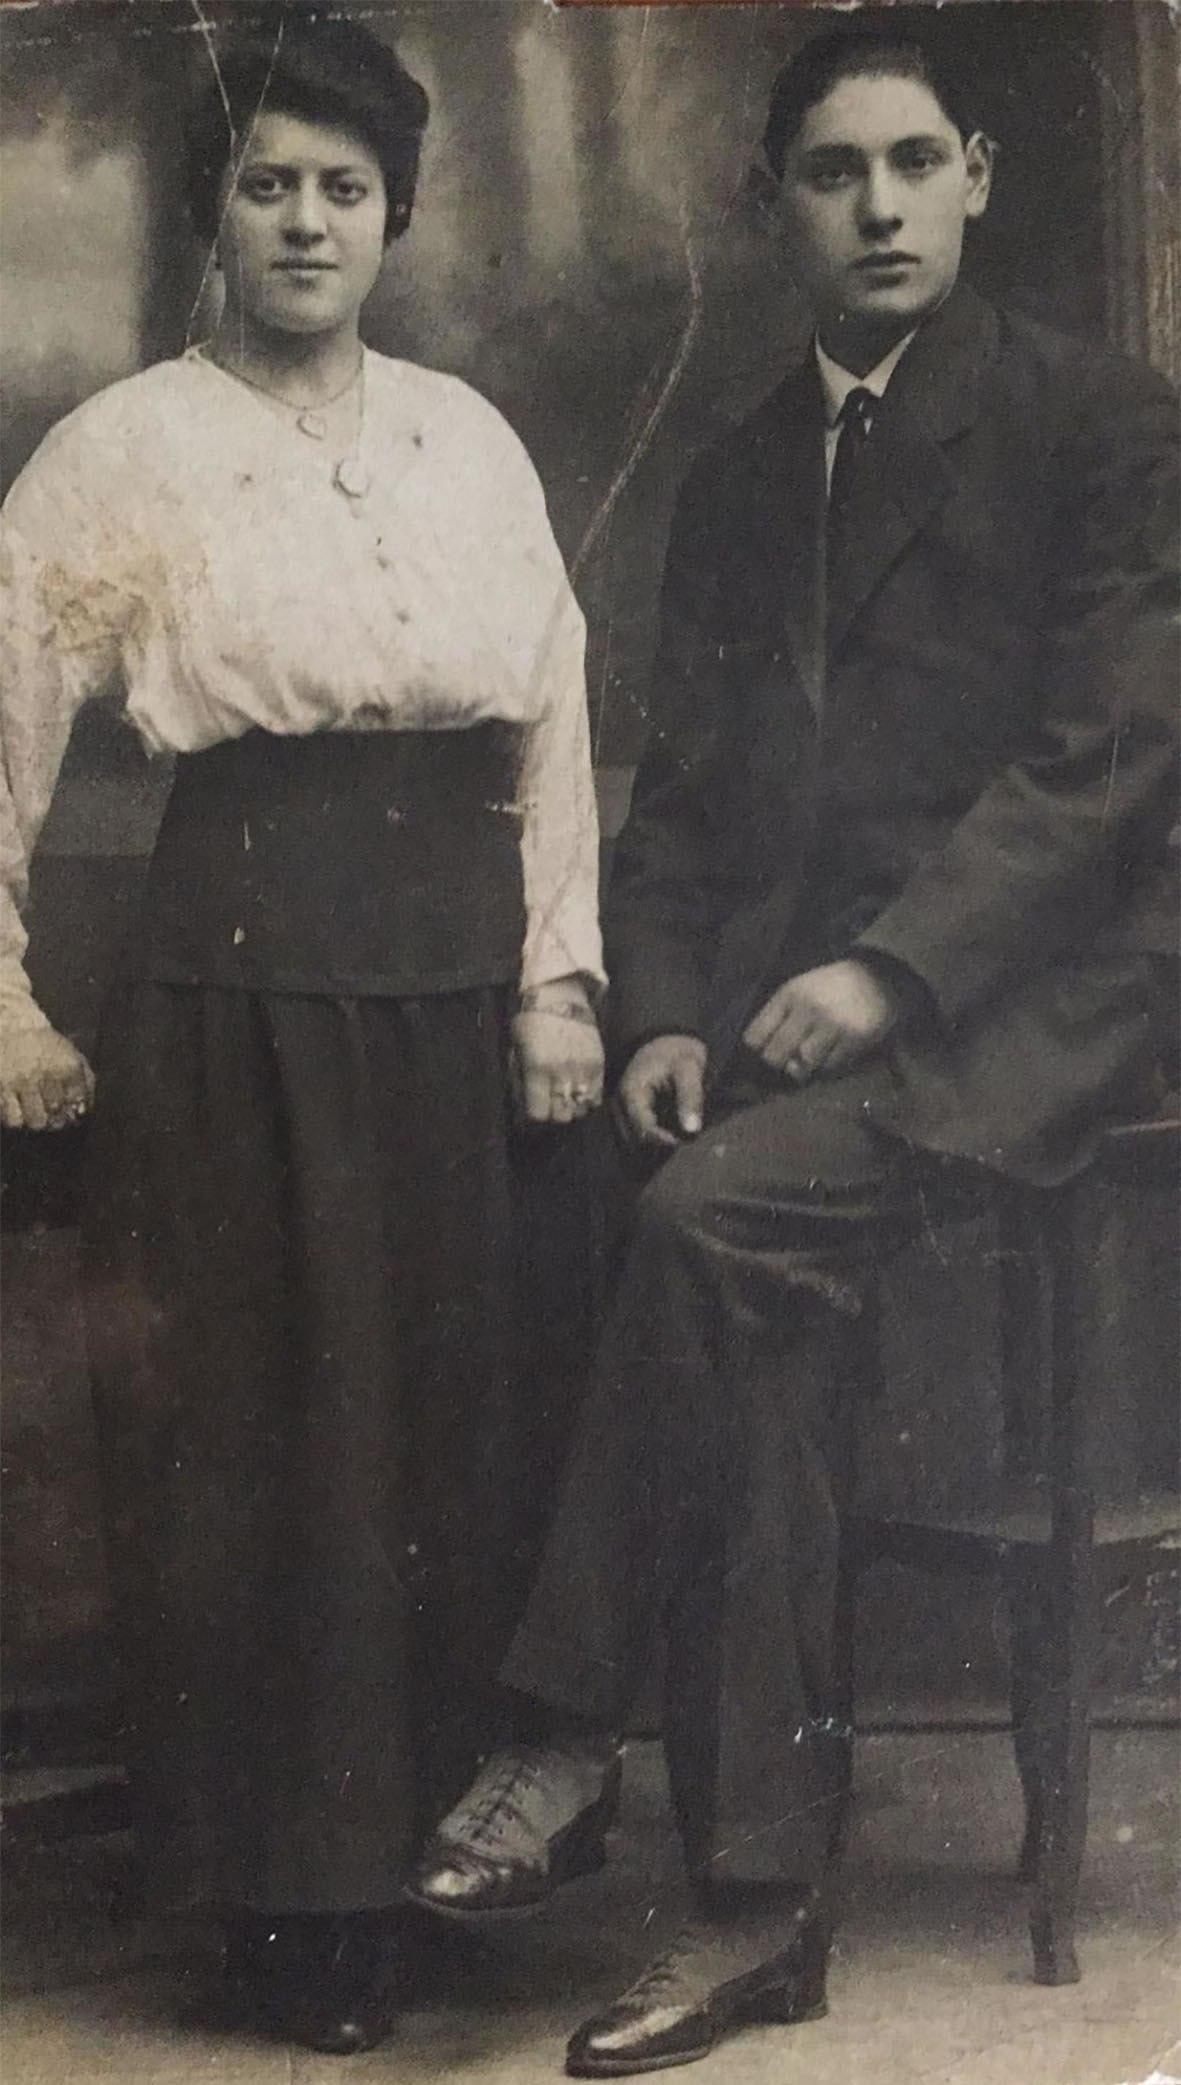 Abraham (Alex's 2x great uncle) and Annie Gittleson (Abraham's wife)